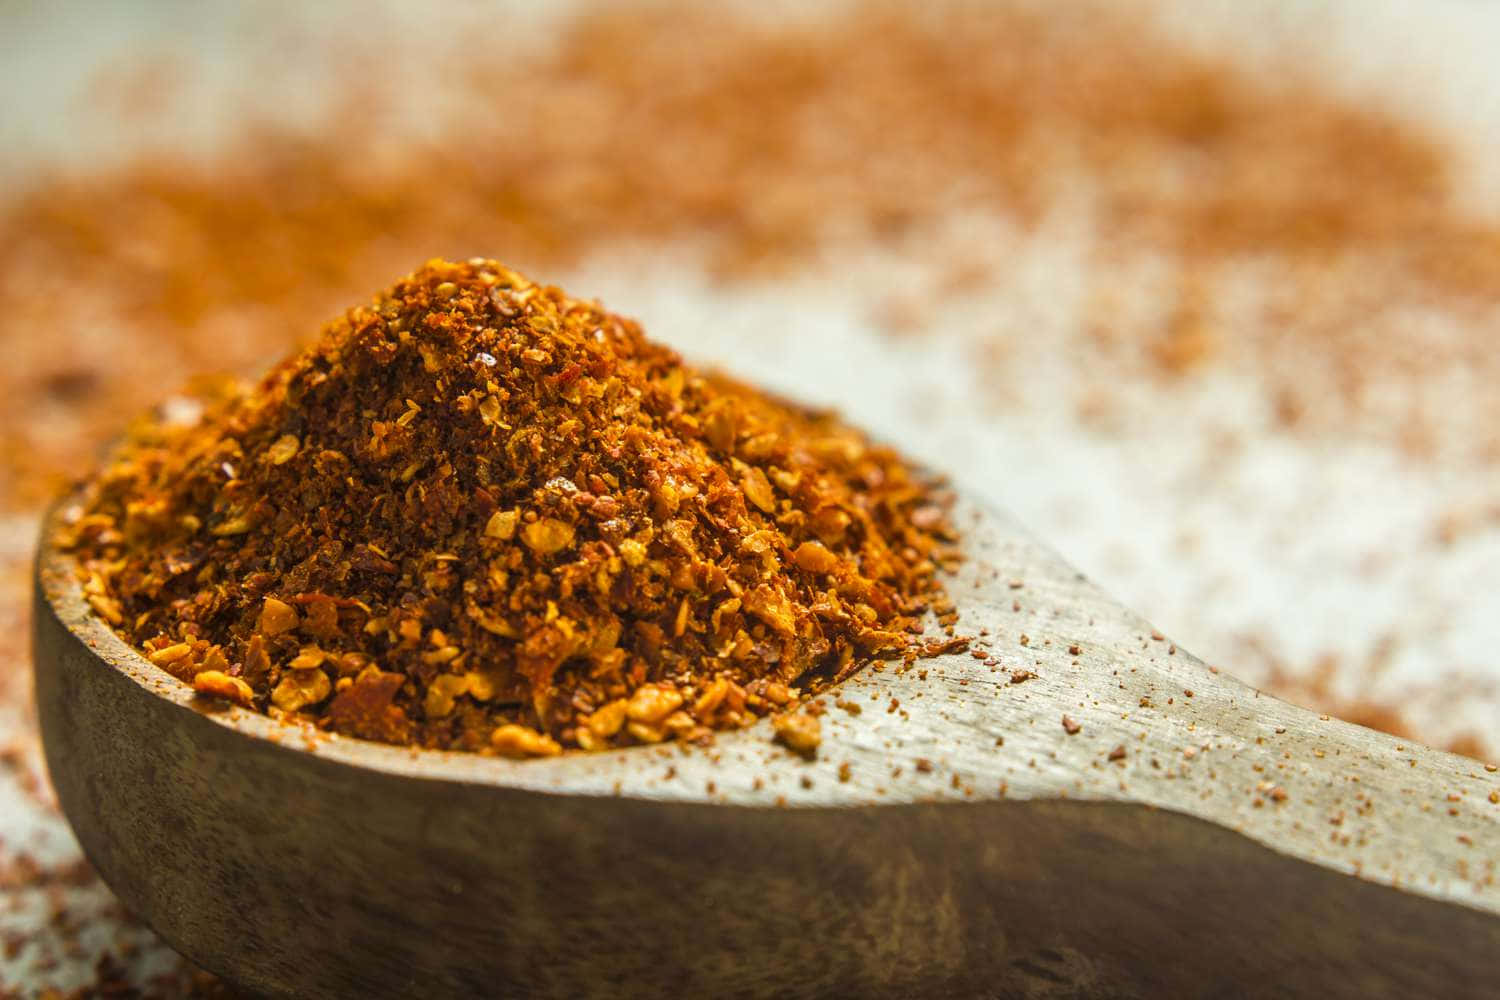 Fiery Red Chili Powder in a Bowl Wallpaper